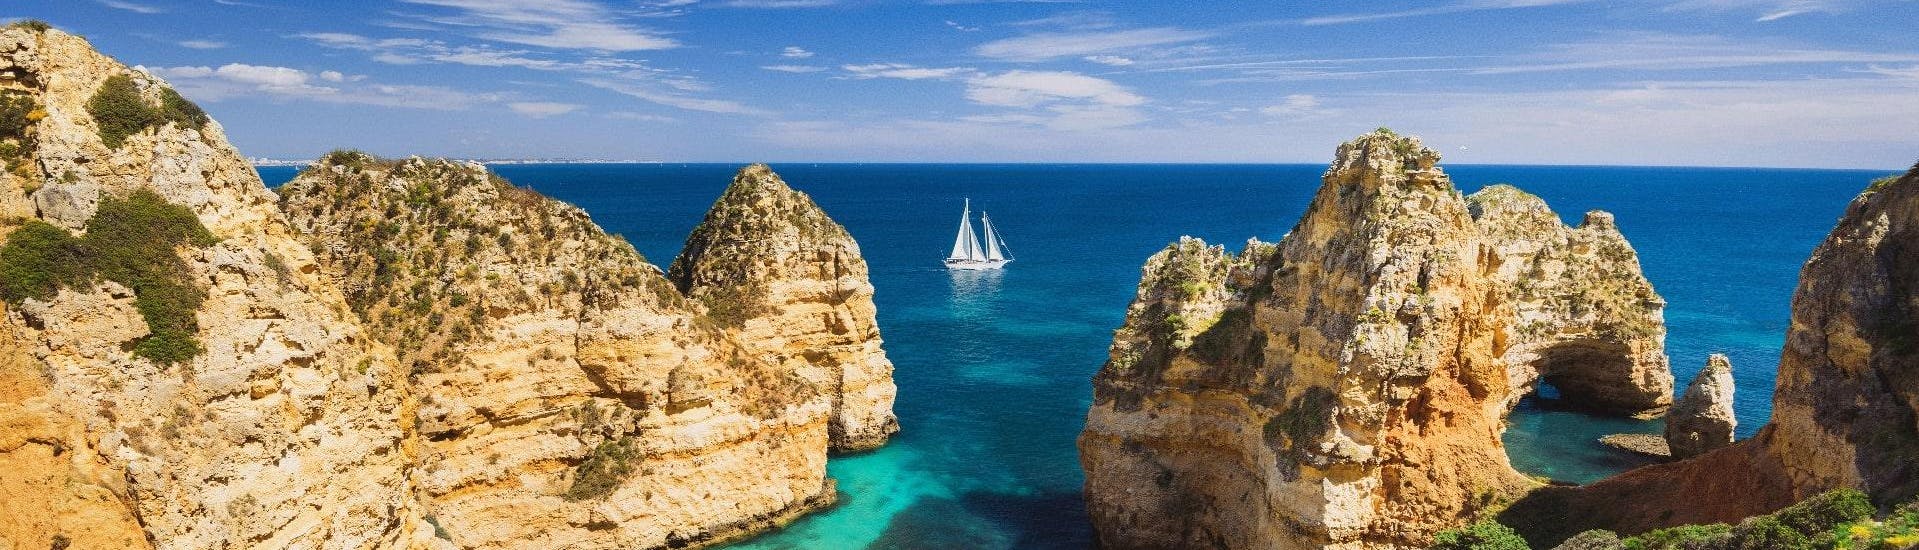 An image of the stunning rock formations of the Algarve coastline that can be viewed on a boat trip from Portimão.